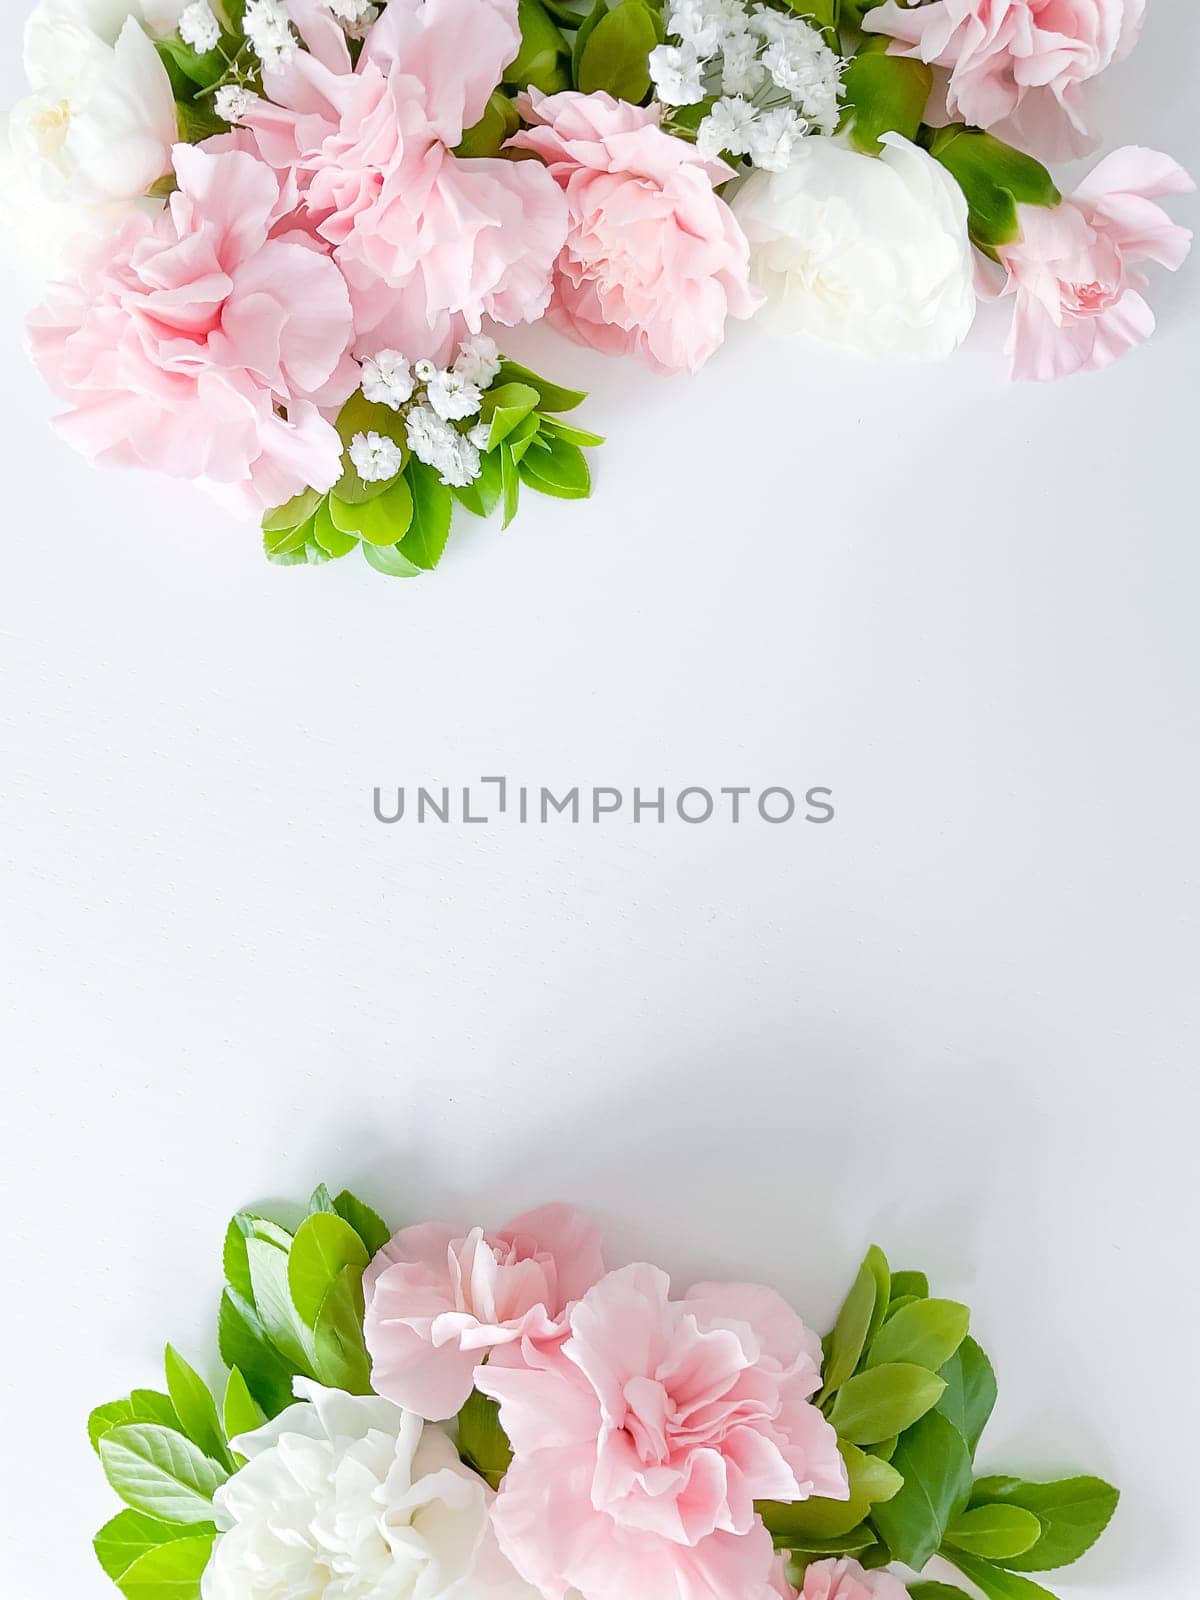 Border frame made of pink and white carnations by Lunnica